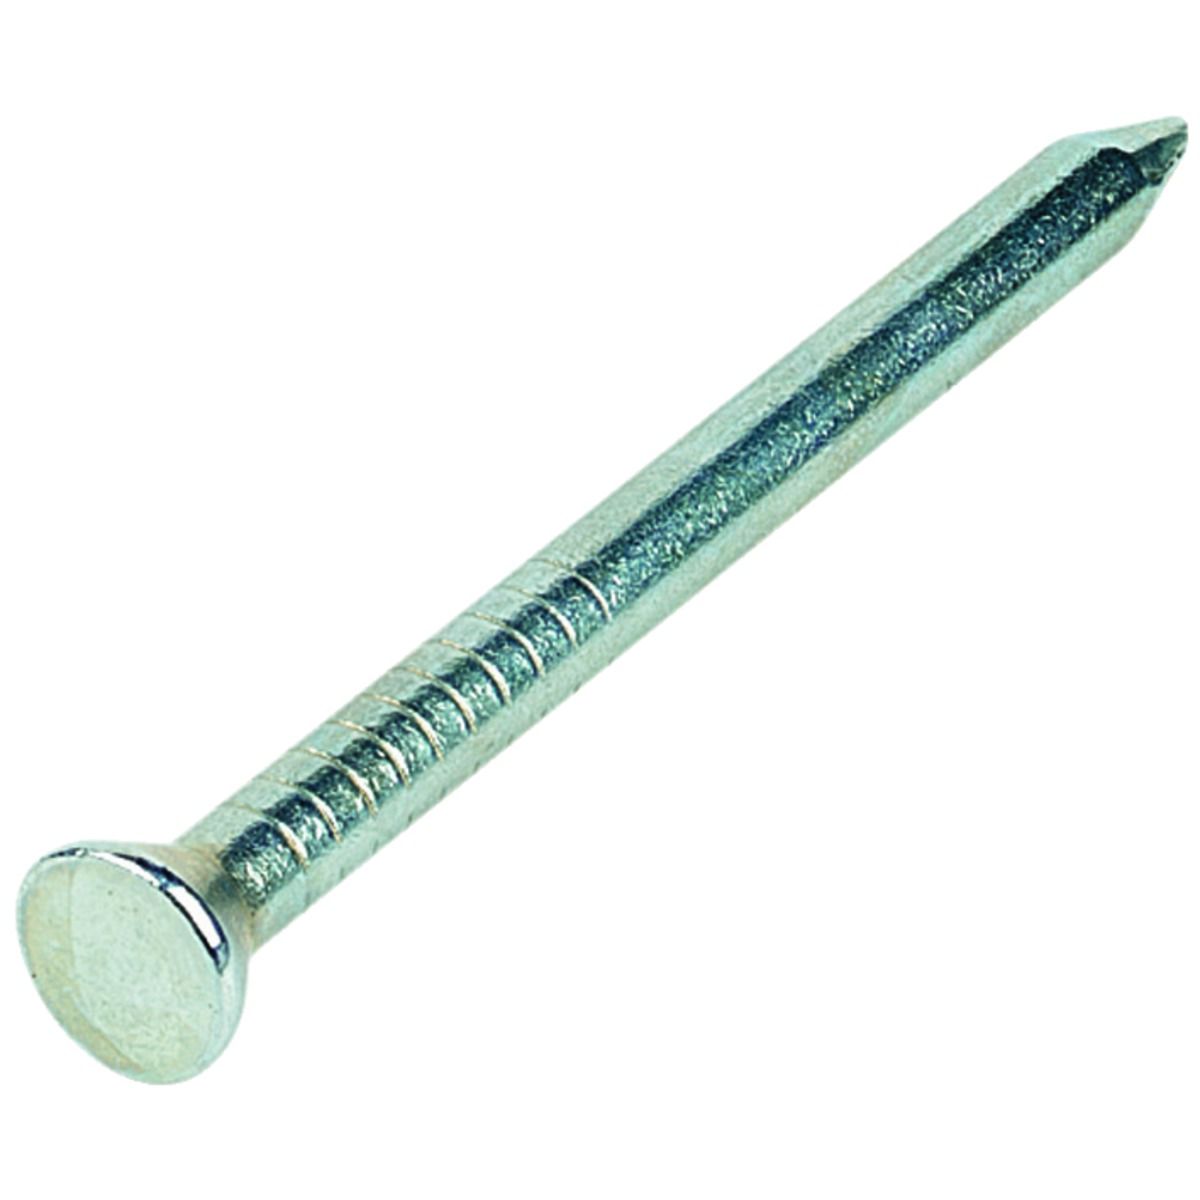 Image of Wickes 50mm Countersunk Head Masonry Nails - Pack of 50